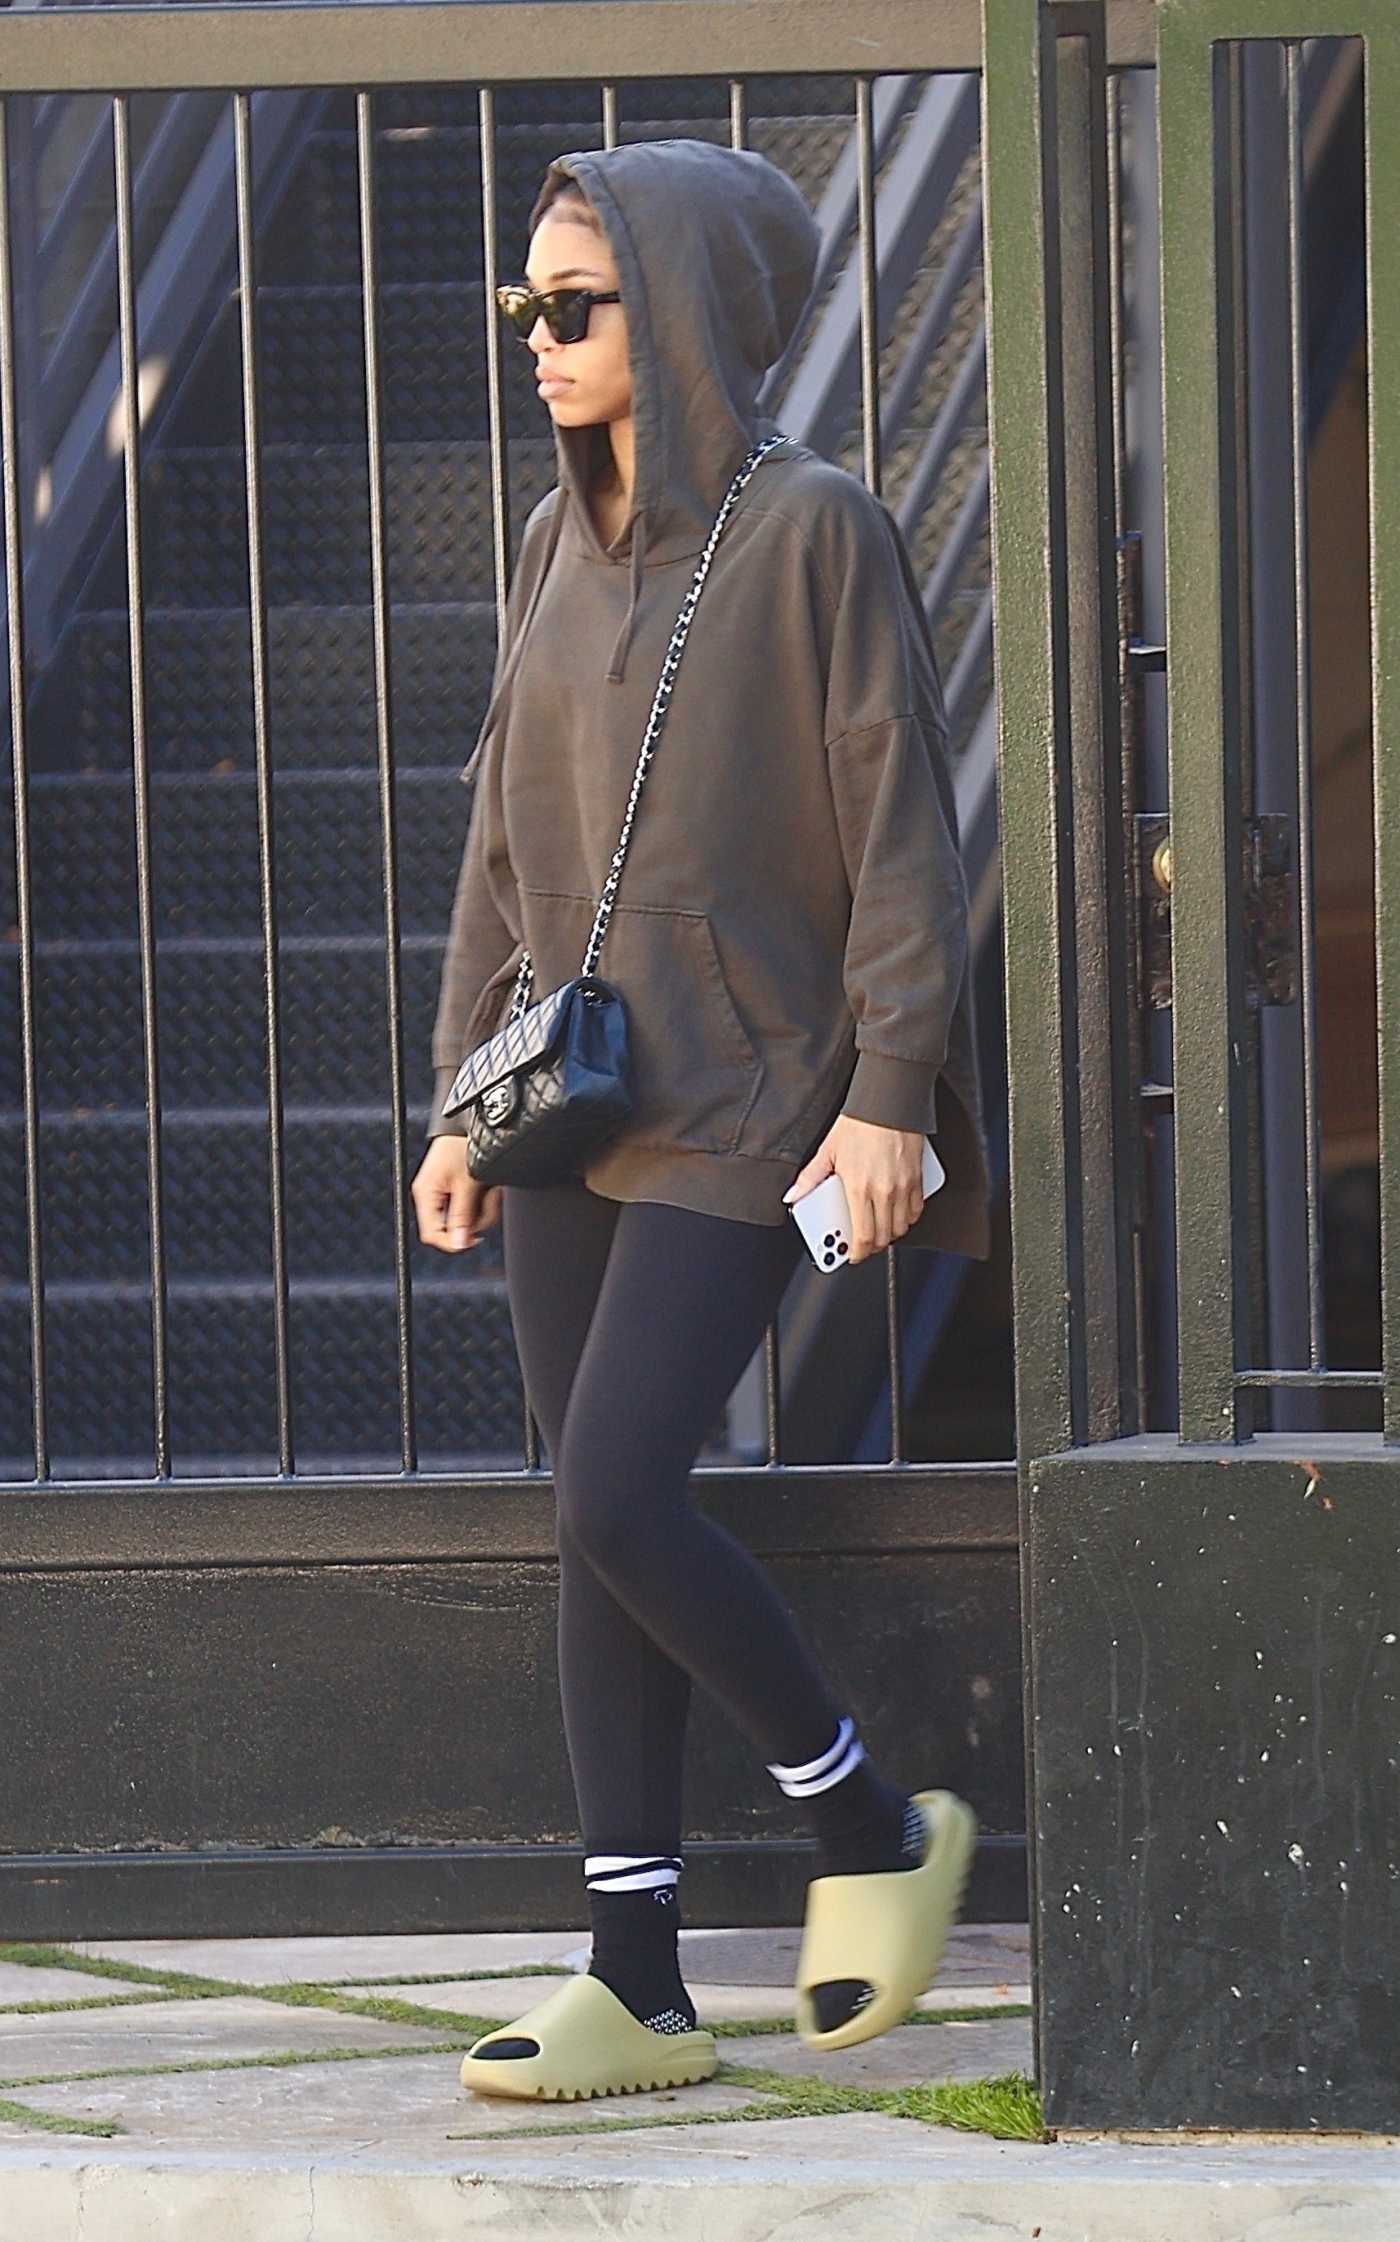 Lori Harvey in a Grey Hoodie Leaves Her Pilates Workout in West Hollywood 01/06/2022